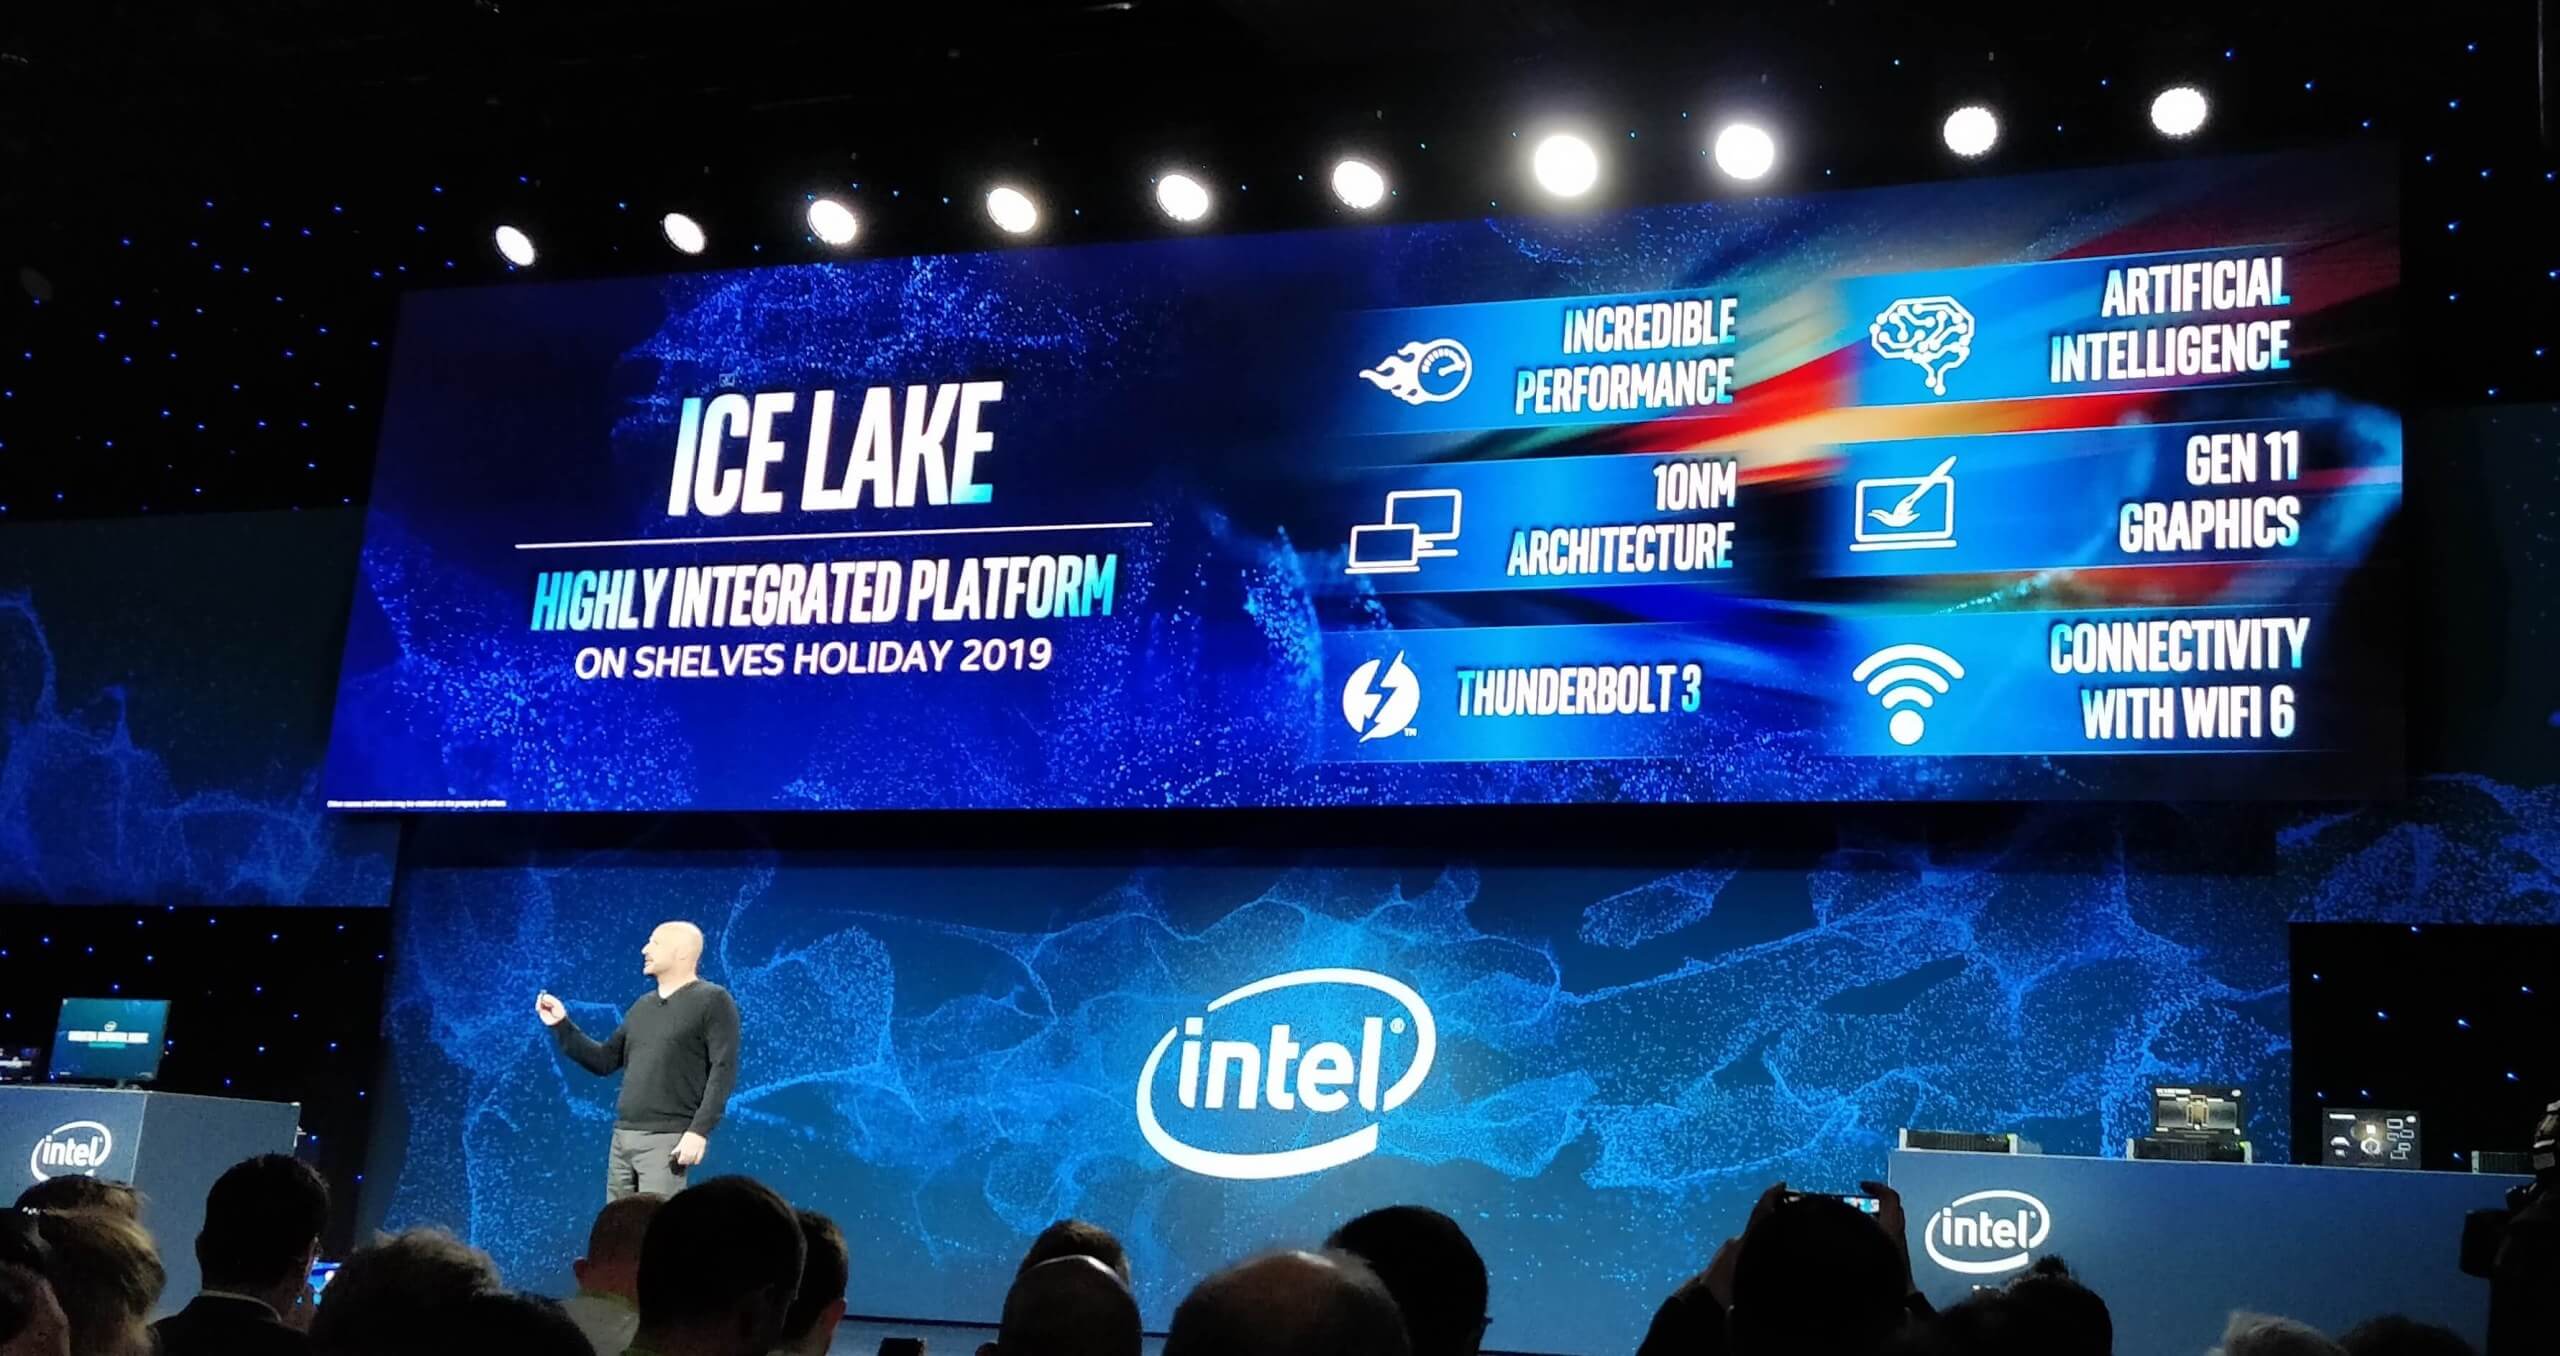 Intel details upcoming 'Ice Lake' Gen 11 integrated graphics architecture